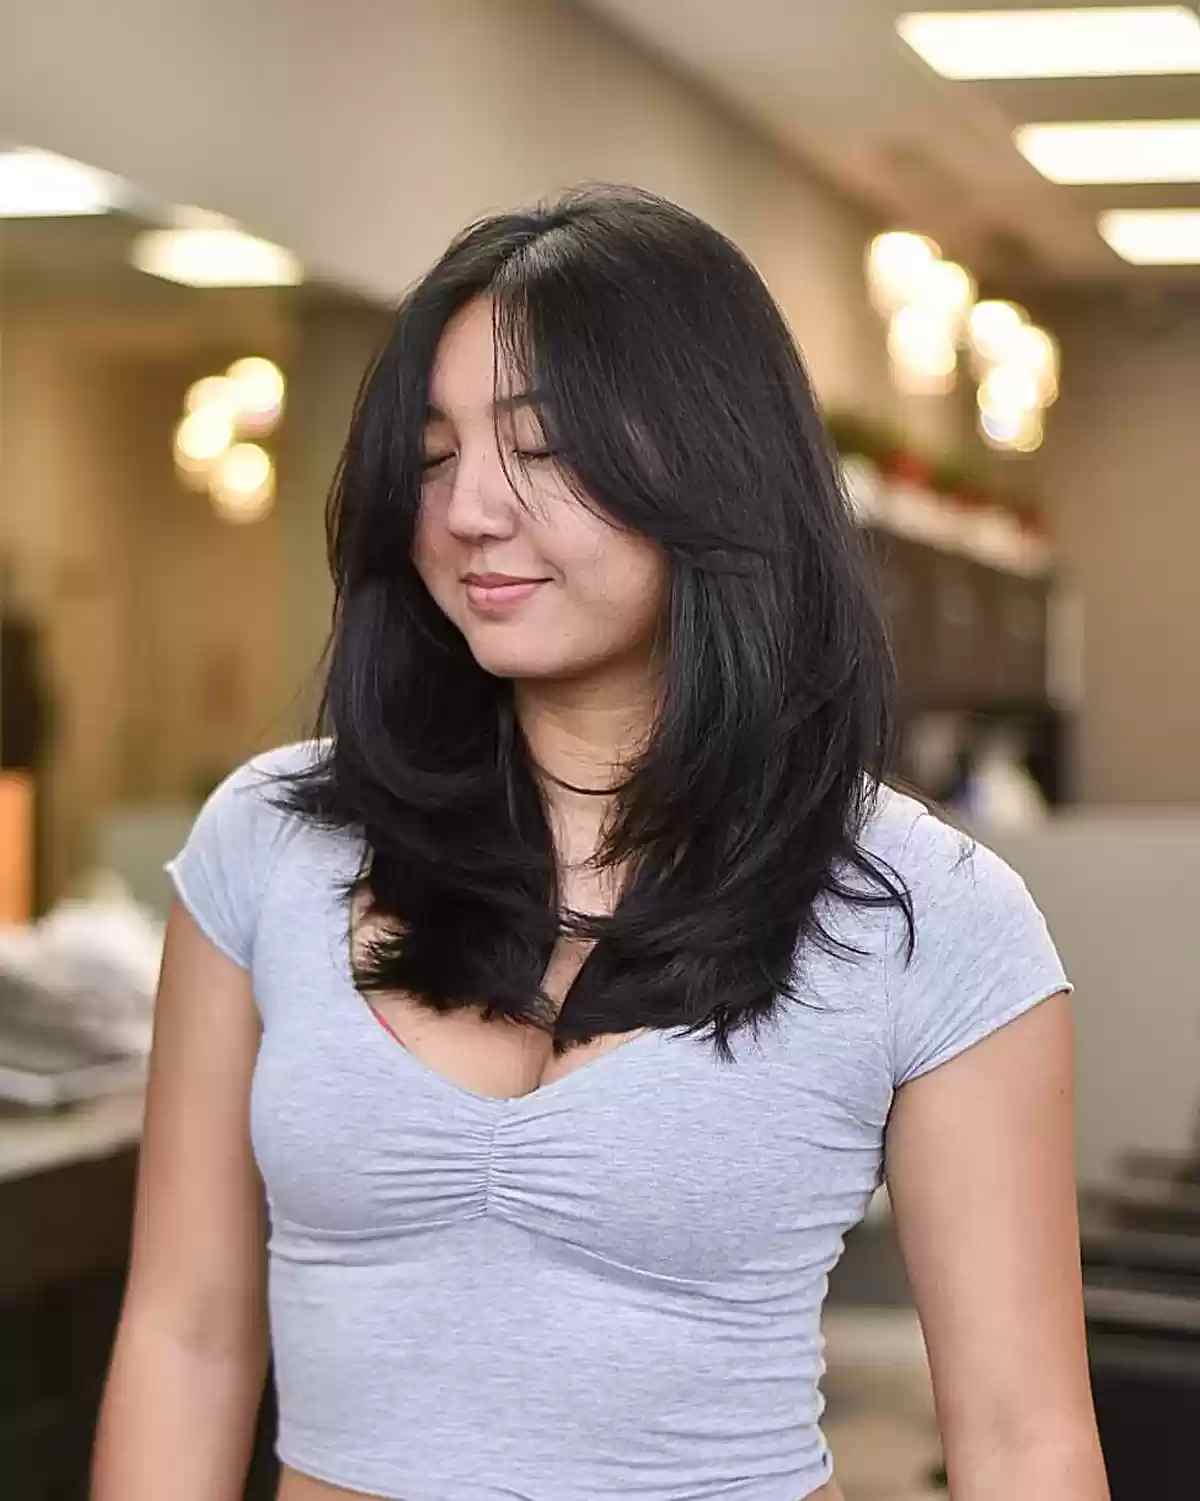 Straight Layered Cut with Face-Framing Bangs and Middle Part on Dense Hair